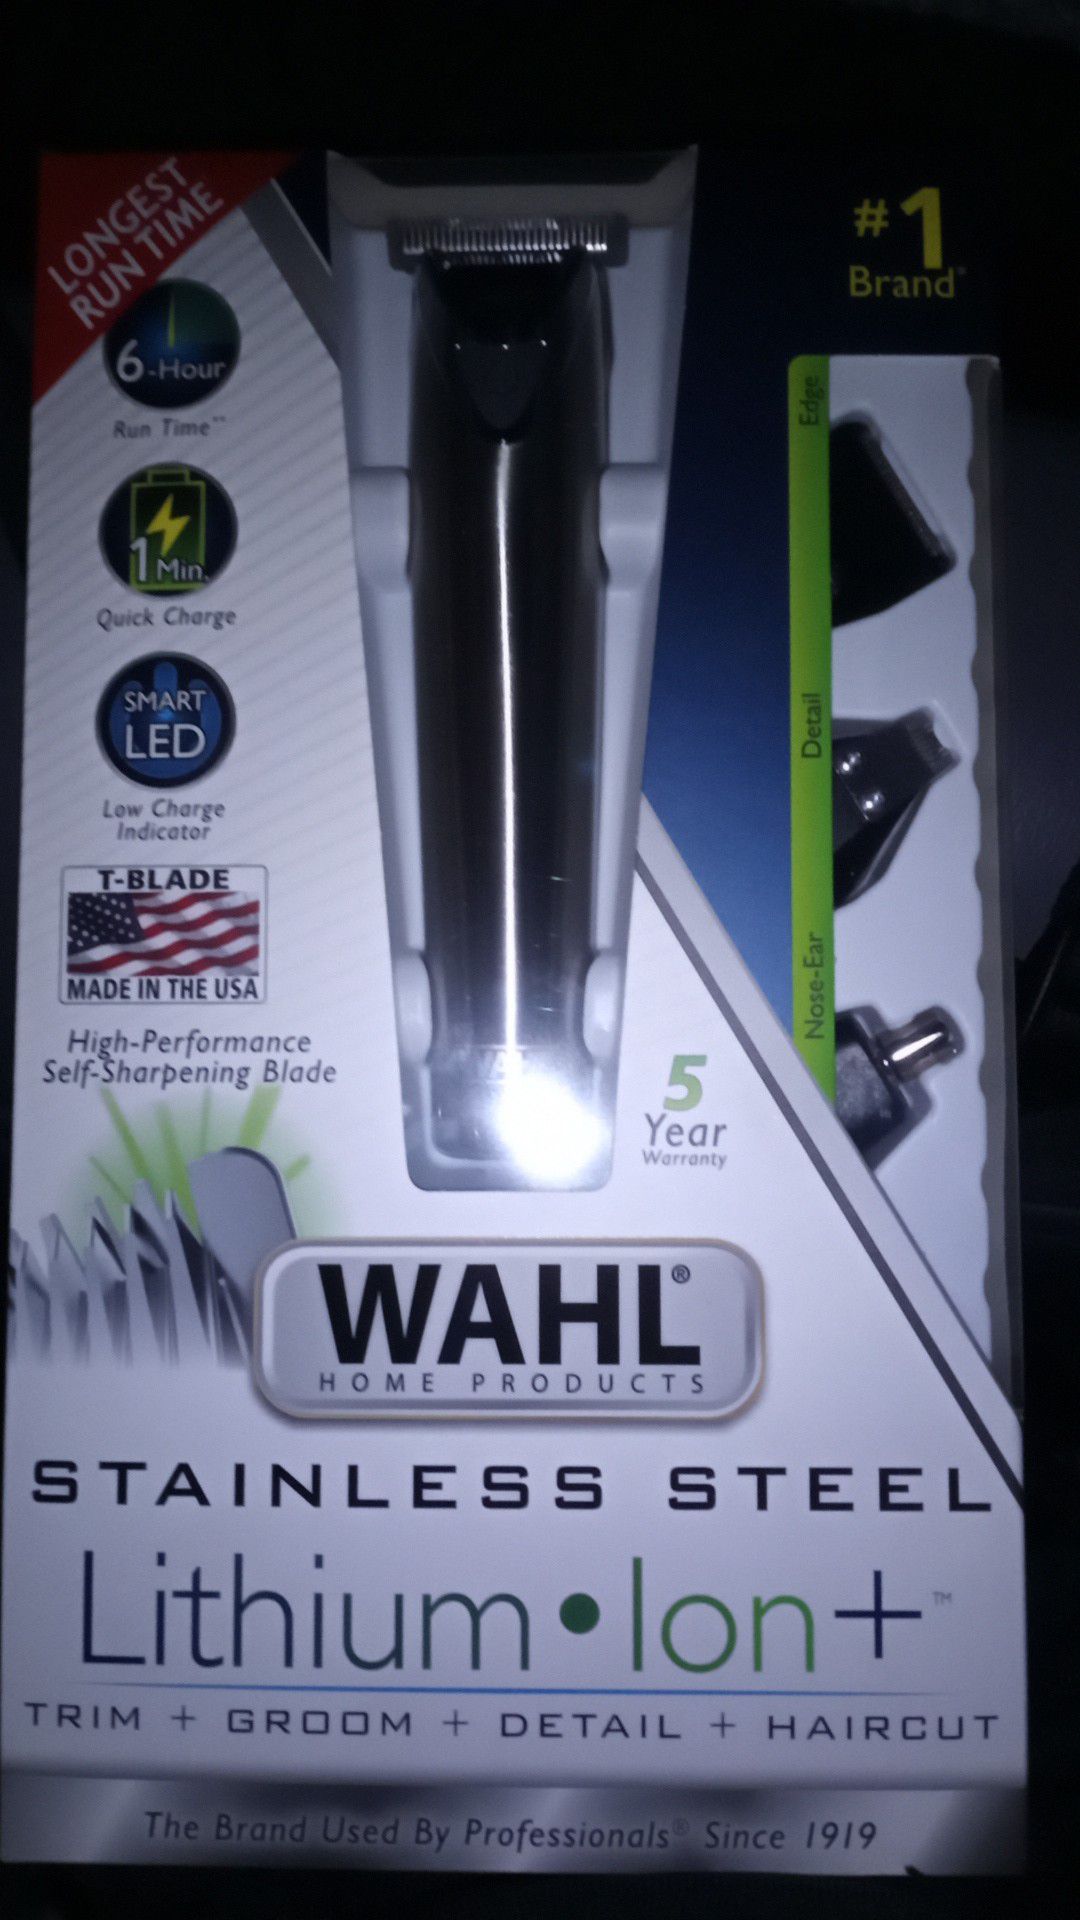 Wahl Stainless Cordless Lithium Ion GroomKit